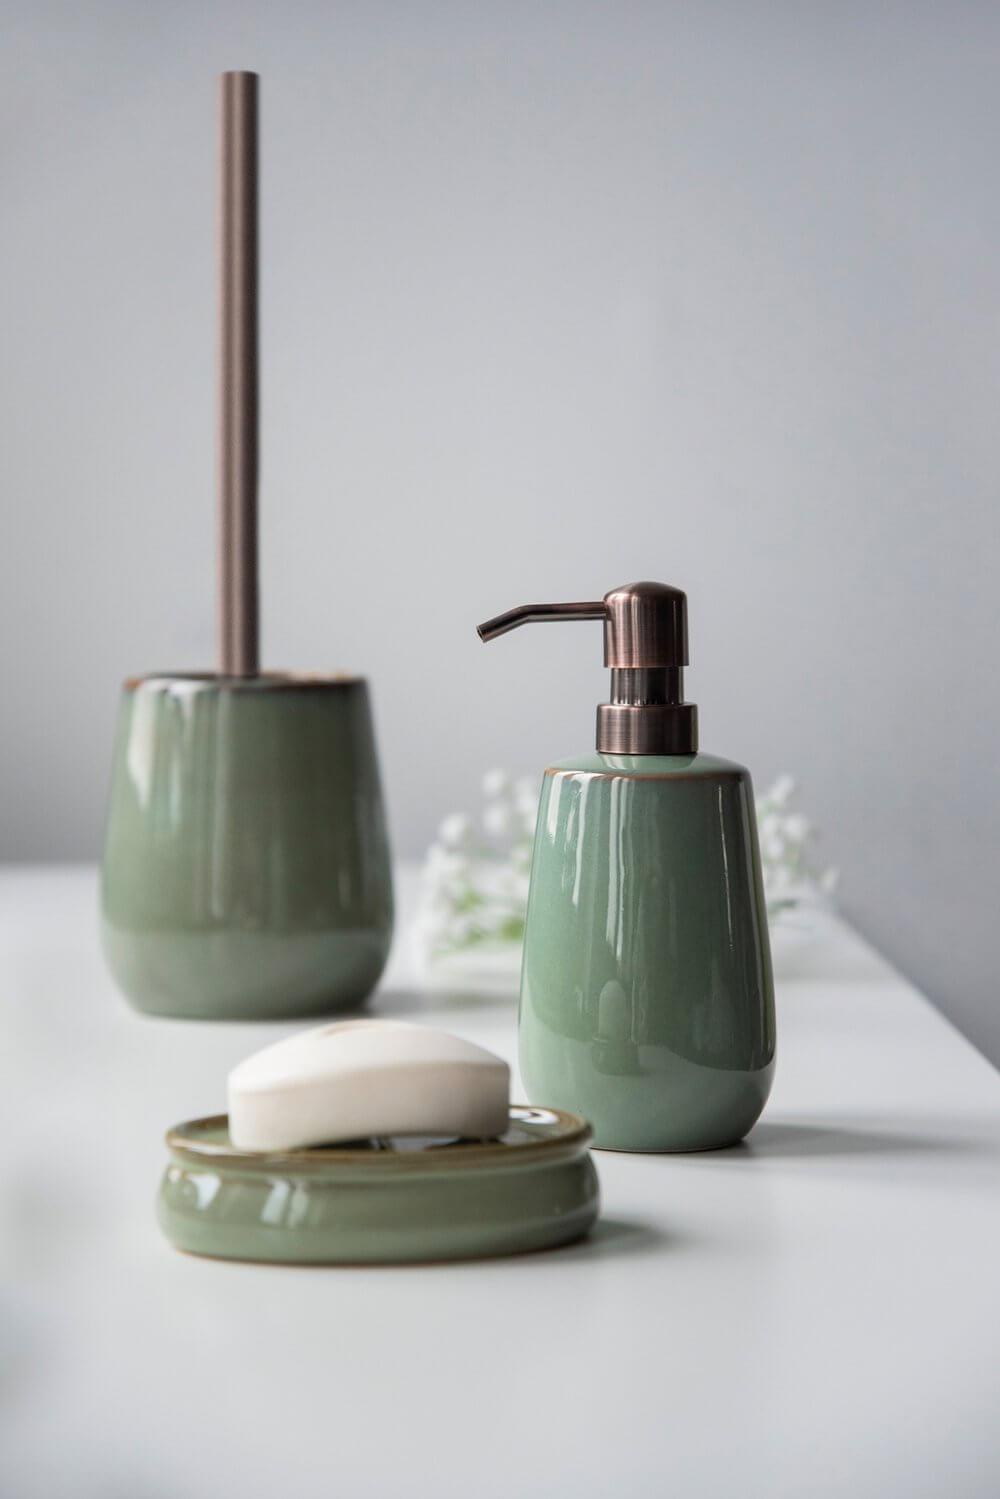 Sirmione Ceramic Soap Dish Reactive Green - BATHROOM - Soap Dispensers and Trays - Soko and Co